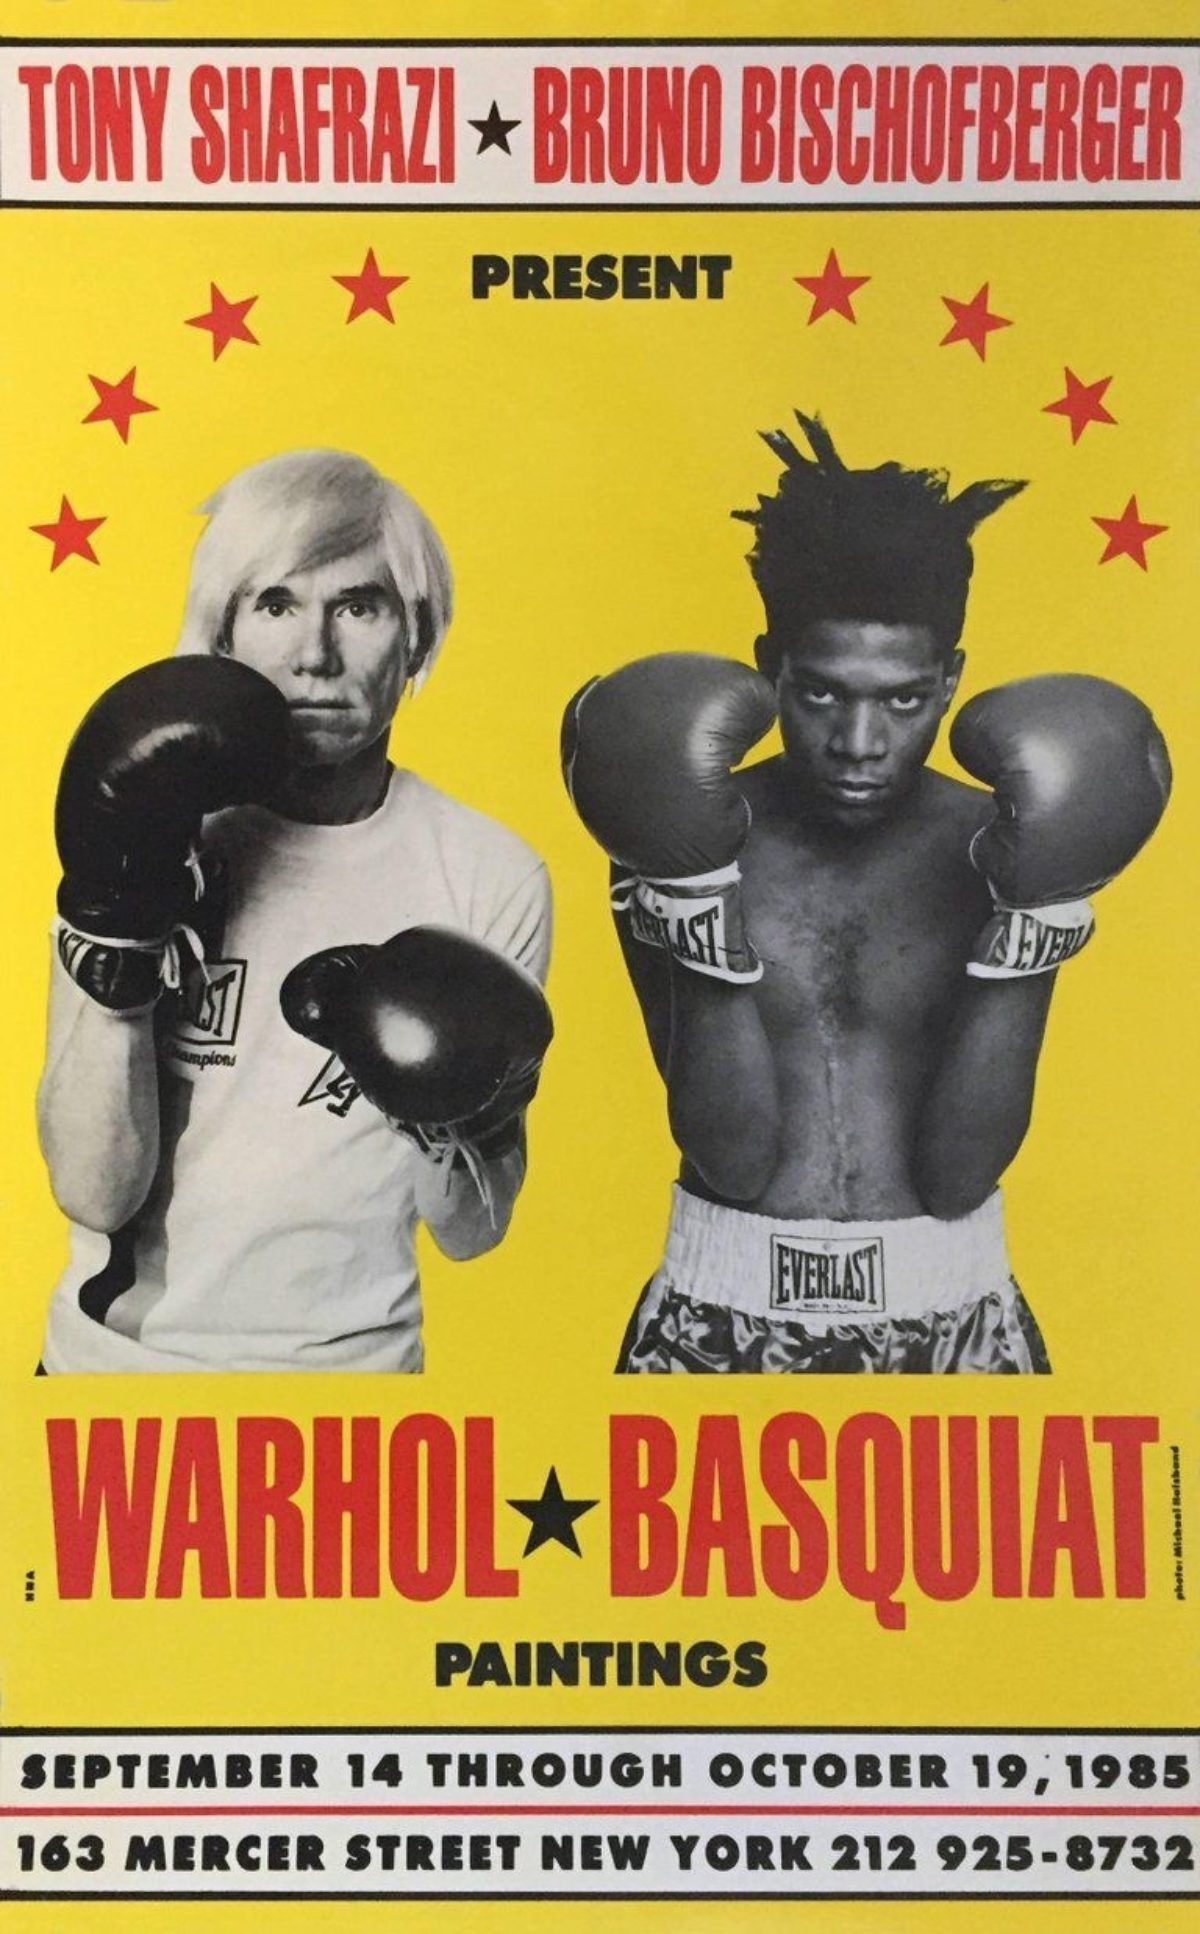 A yellow poster of Andy Warhol and Jean Michel Basquiat in boxing attire and boxing gloves.